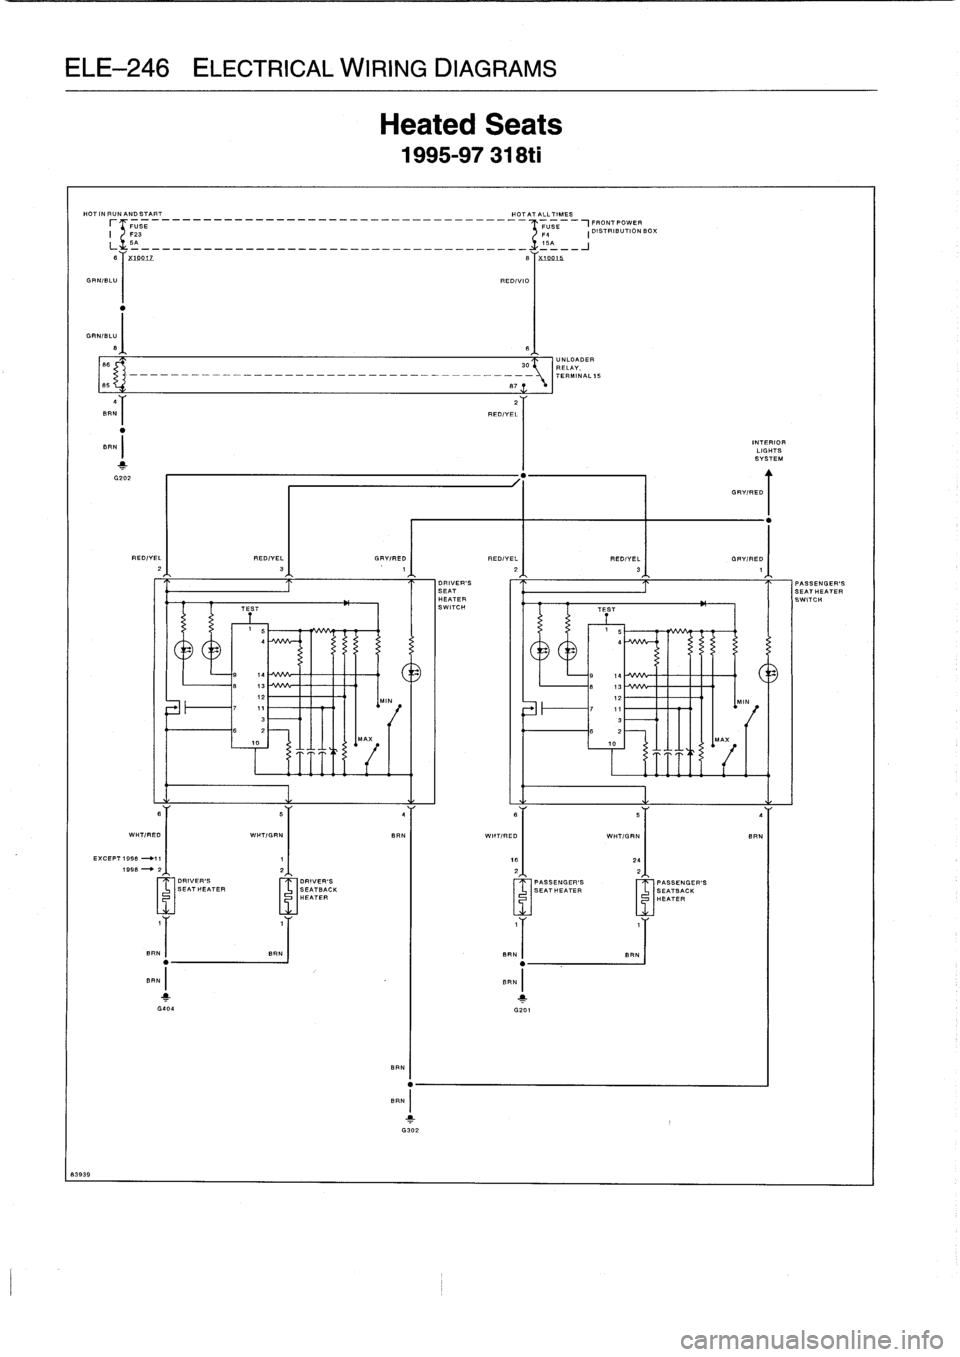 BMW M3 1996 E36 Workshop Manual 
ELE-246
ELECTRICAL
WIRING
DIAGRAMS

63939

HOT
IN
RUN
T
AND
START

	

HOT
ATALLTIMES
rTFUSE
-------------------------_---------
FUSE
,FRONTPOWER

F23

	

14

	

1DISTRIBUTION
BOX
5-_________________